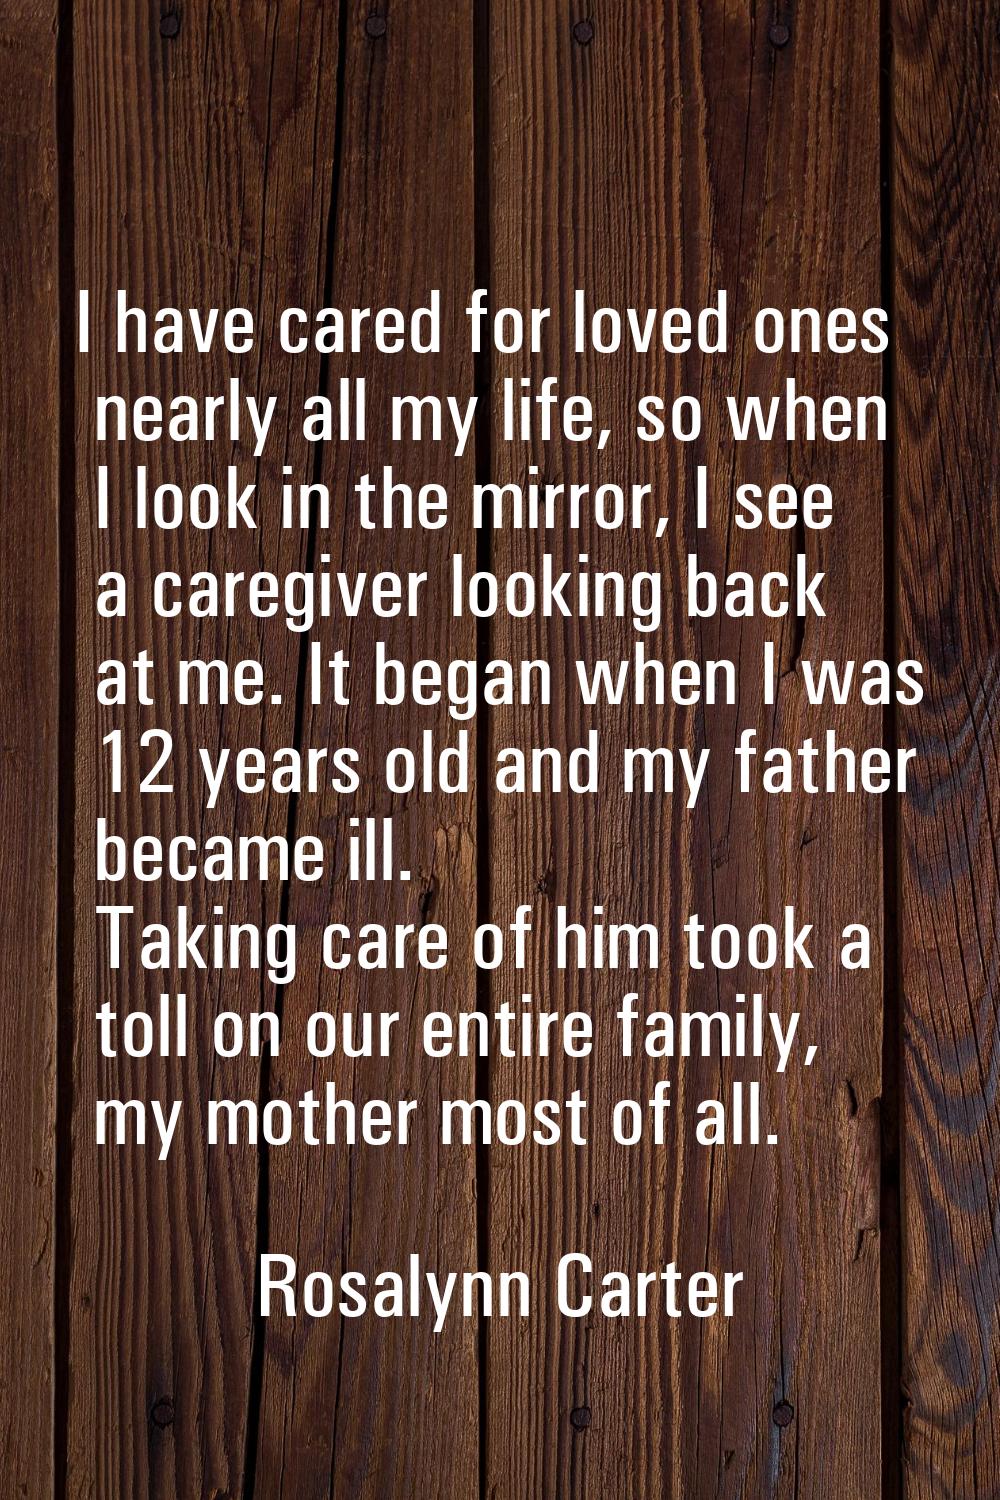 I have cared for loved ones nearly all my life, so when I look in the mirror, I see a caregiver loo